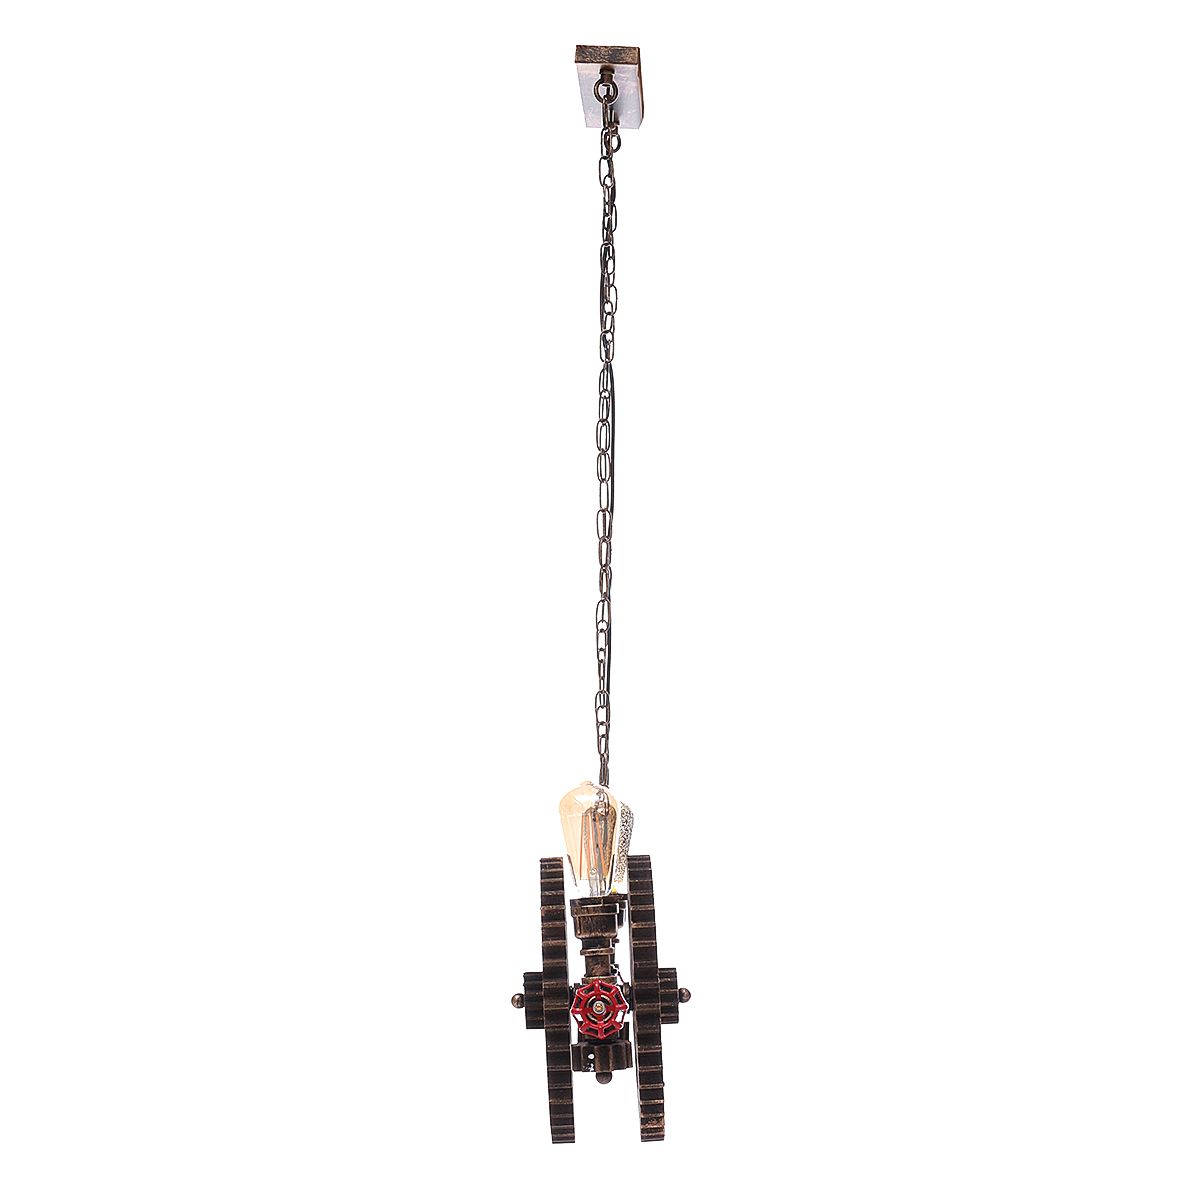 Antique-Style-Rust-Metal-Gear-2-Bare-Bulbs-Waterpipe-Ceiling-Pendant-Light-without-Blub-1556607